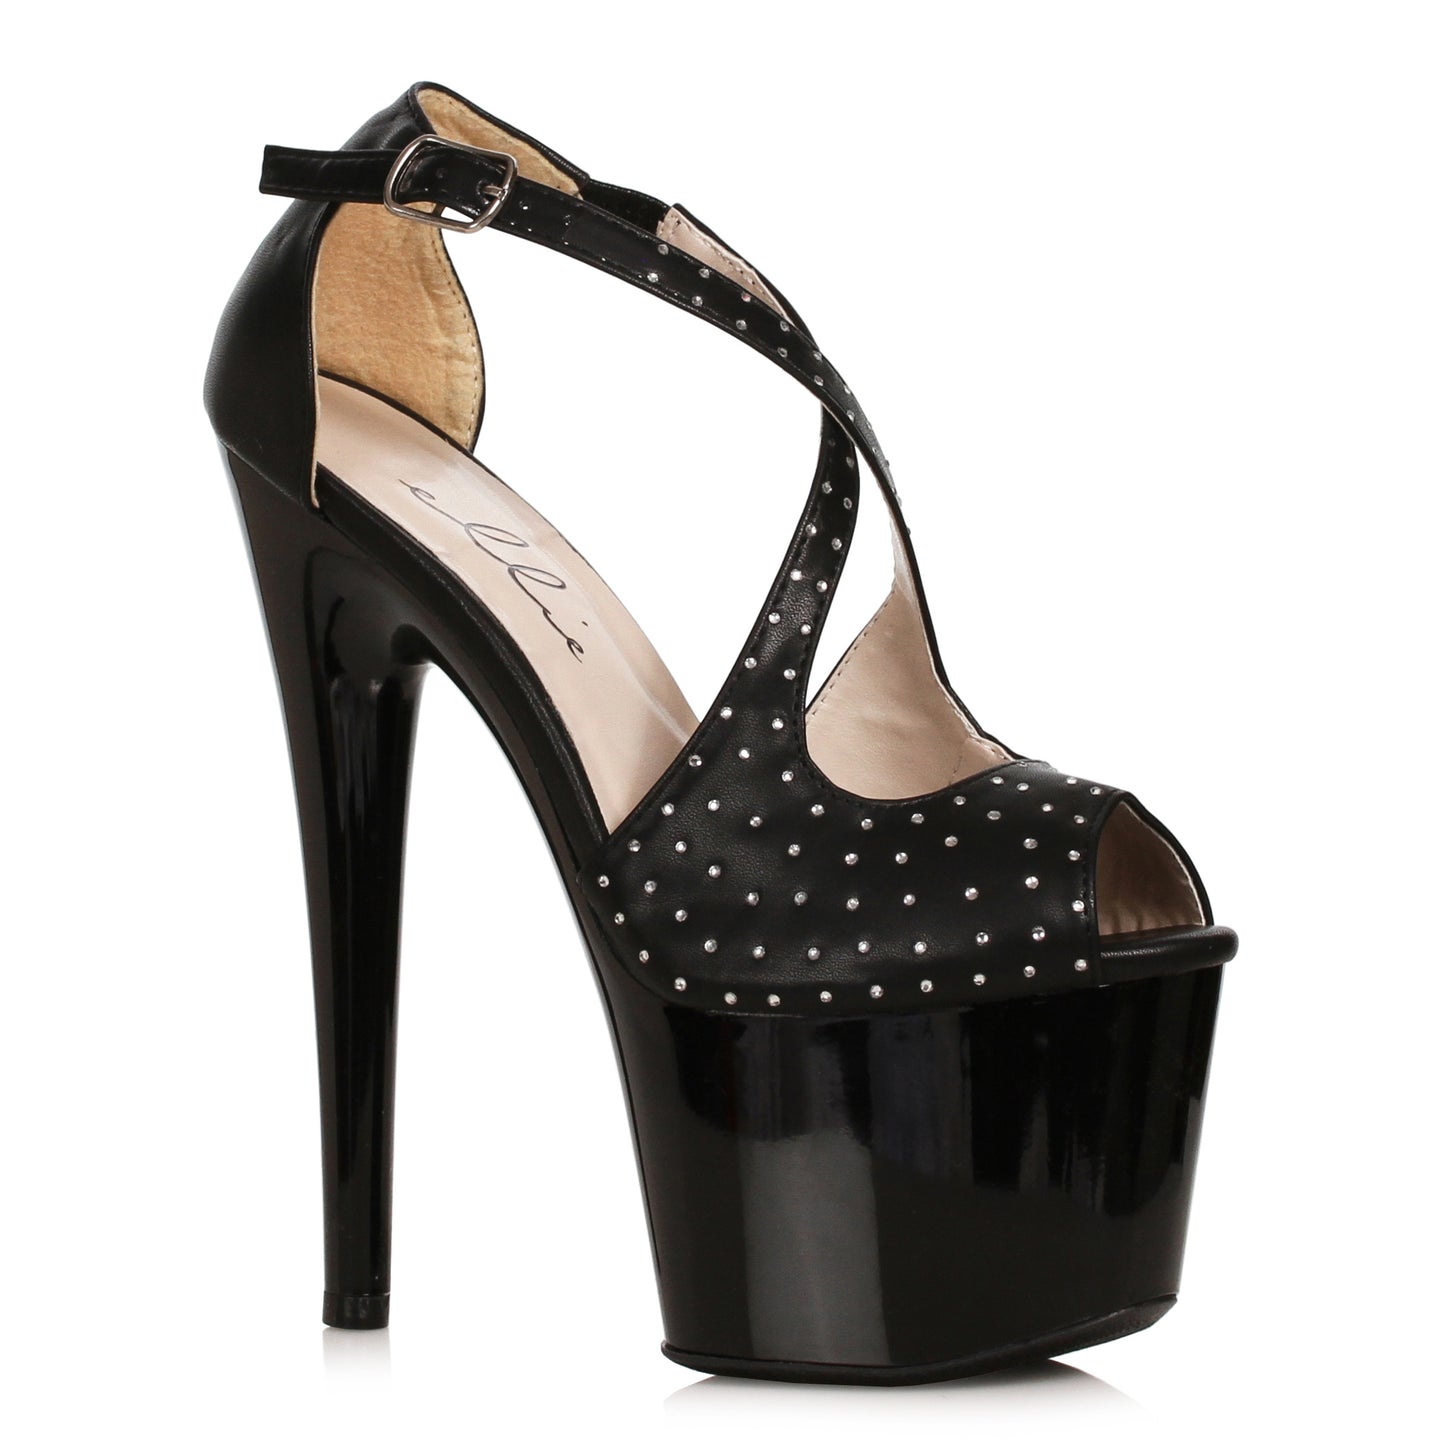 709-WICKED Ellie Shoes 7" Stiletto with Studs 7 INCH HEEL